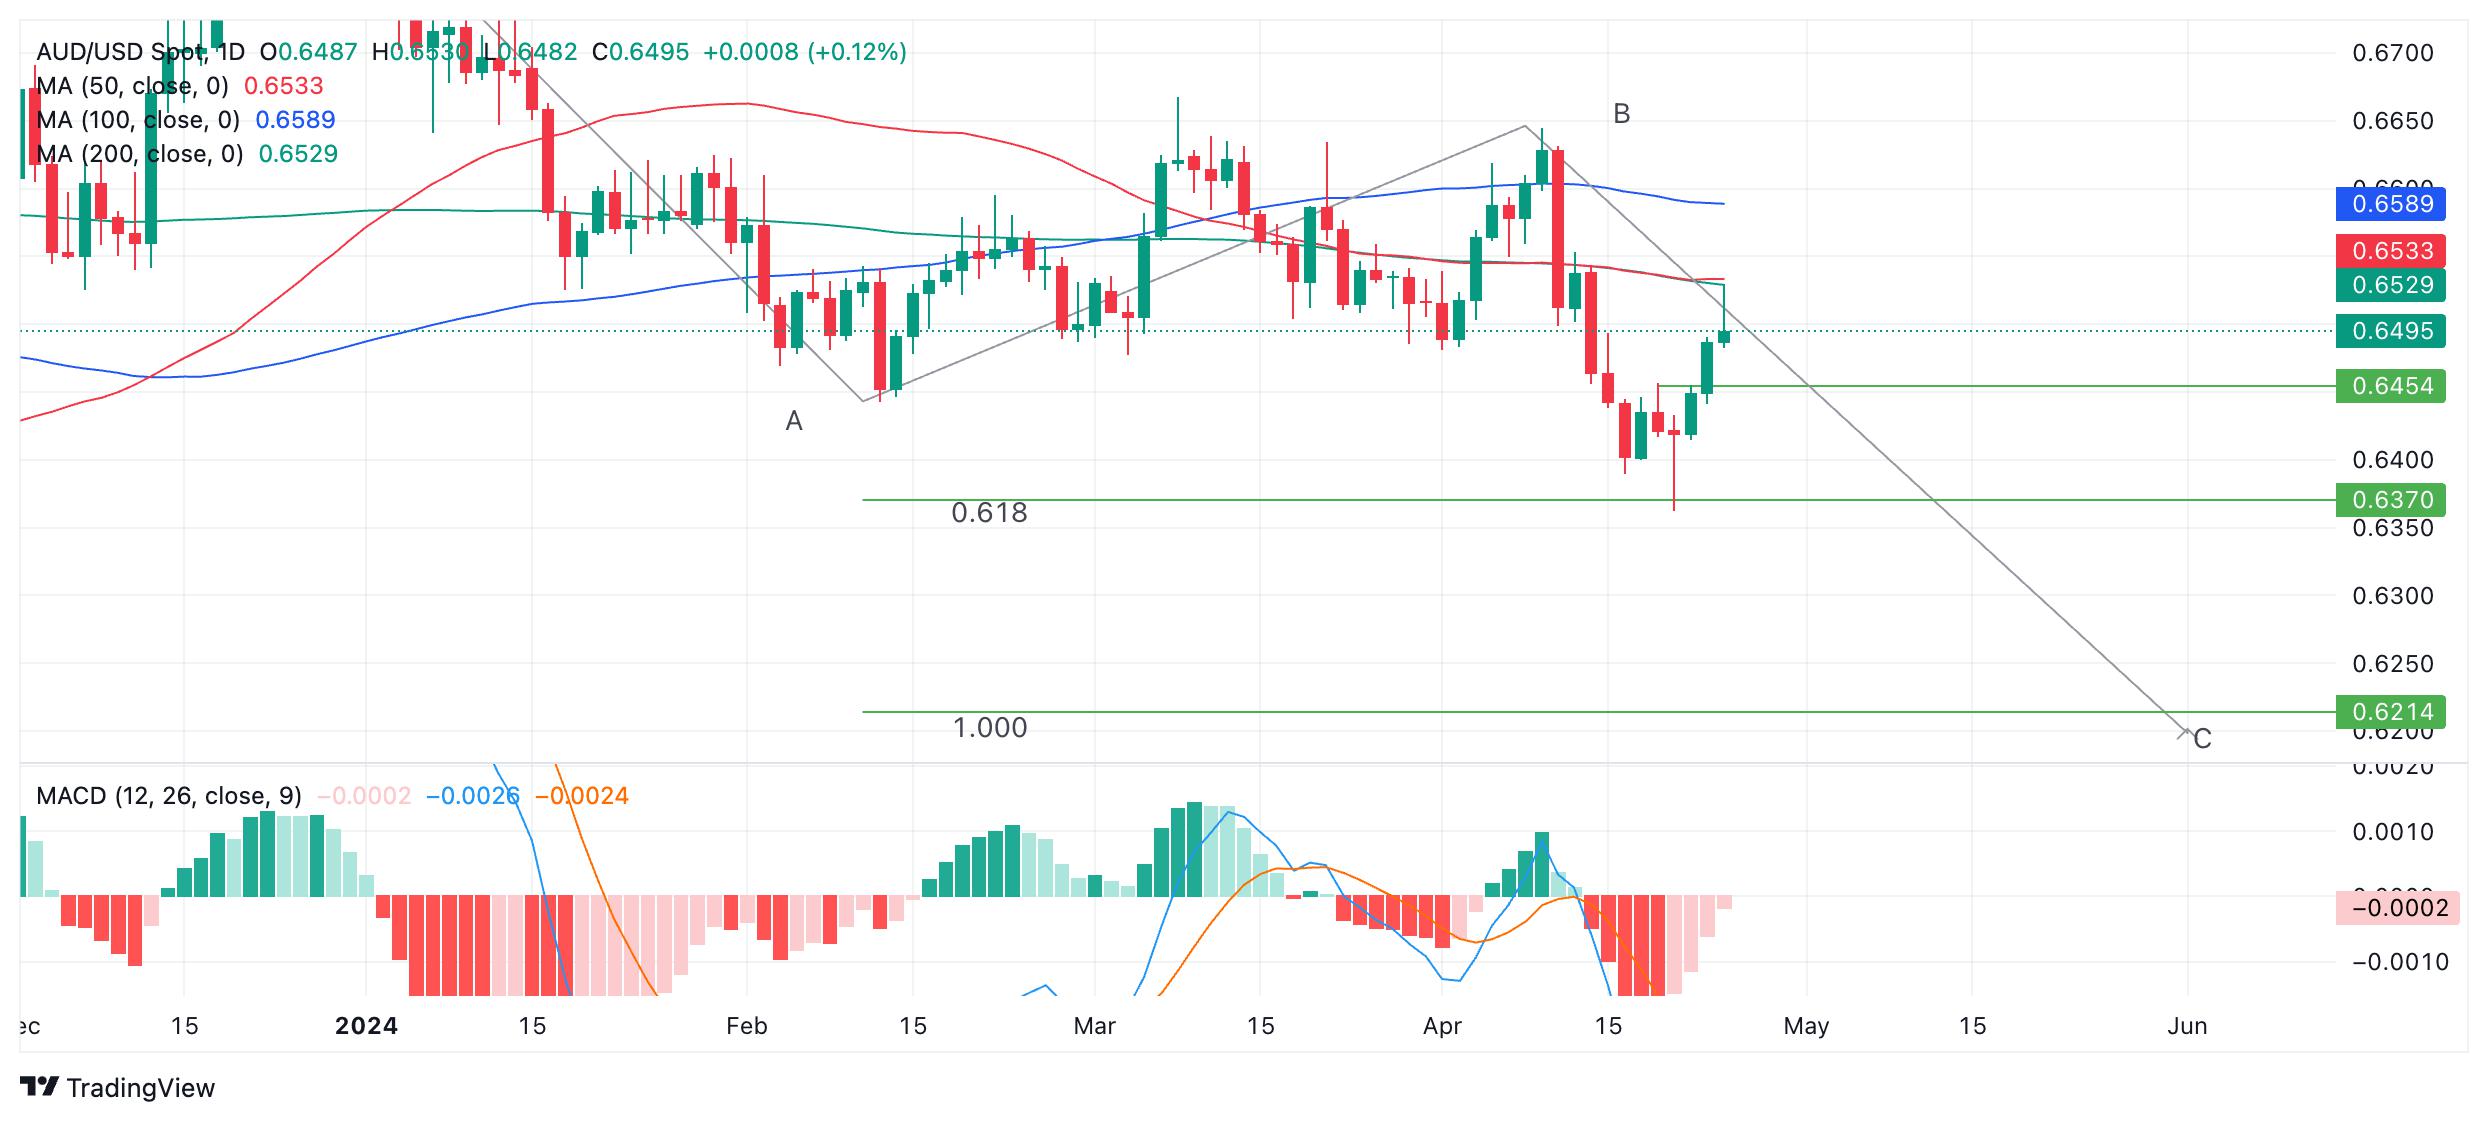 AUD/USD continues rising after inflation in Q1 proves stickier-than-expected